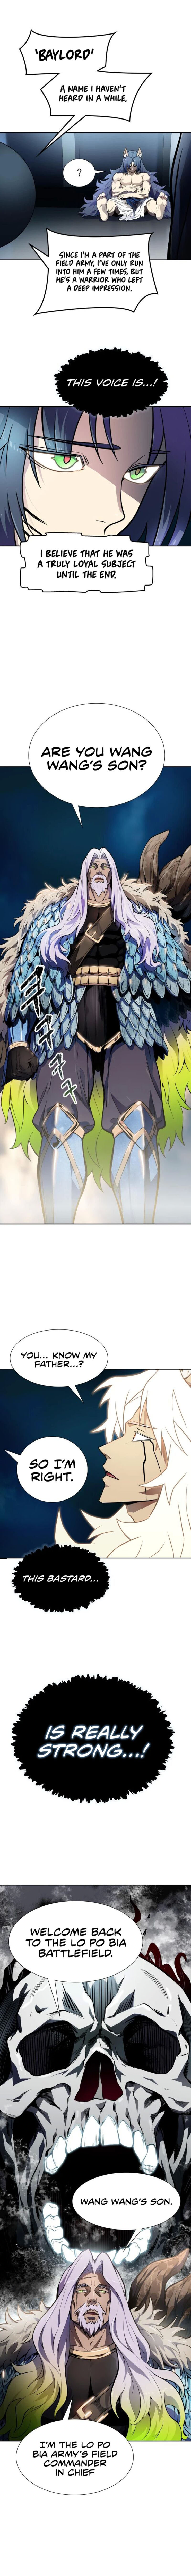 Tower Of God 579 23